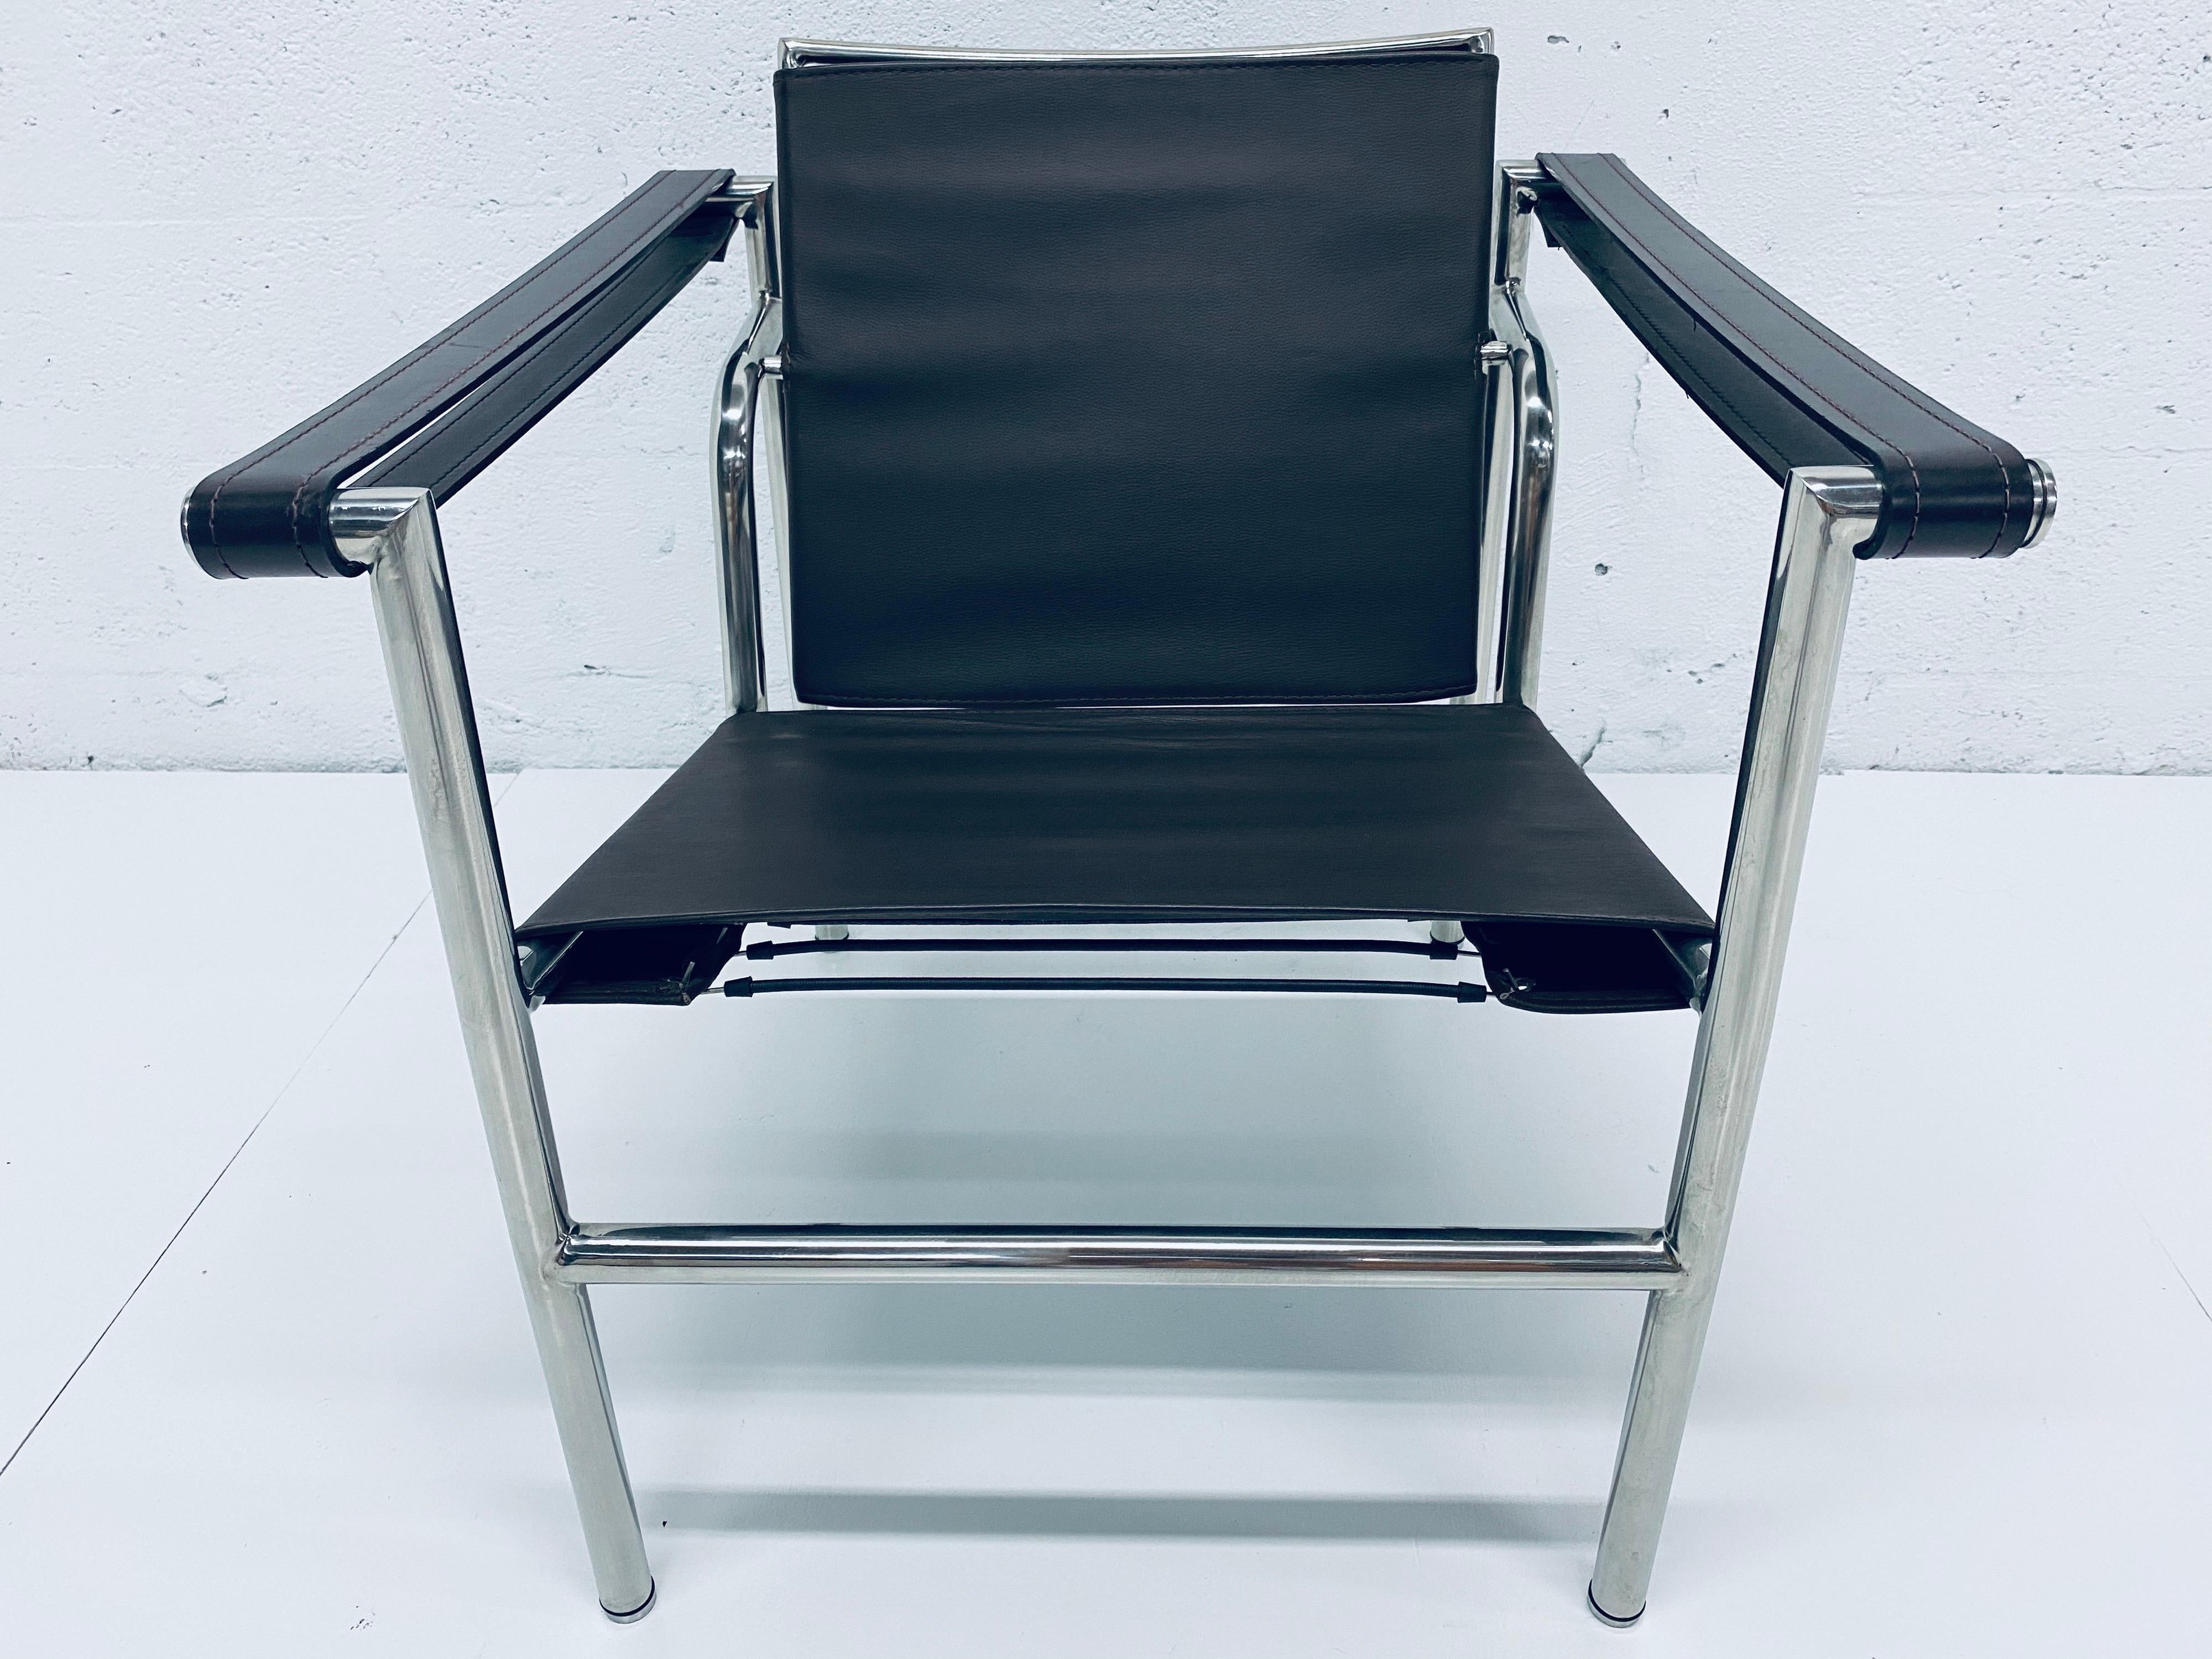 Le Corbusier LC1 sling chair in brown leather on chrome frame based off the original design by Le Corbusier, Pierre Jeanneret and Charlotte Perriand. The leather elements connect with tension springs. Manufacturer and origin unknown, circa 1970s. 